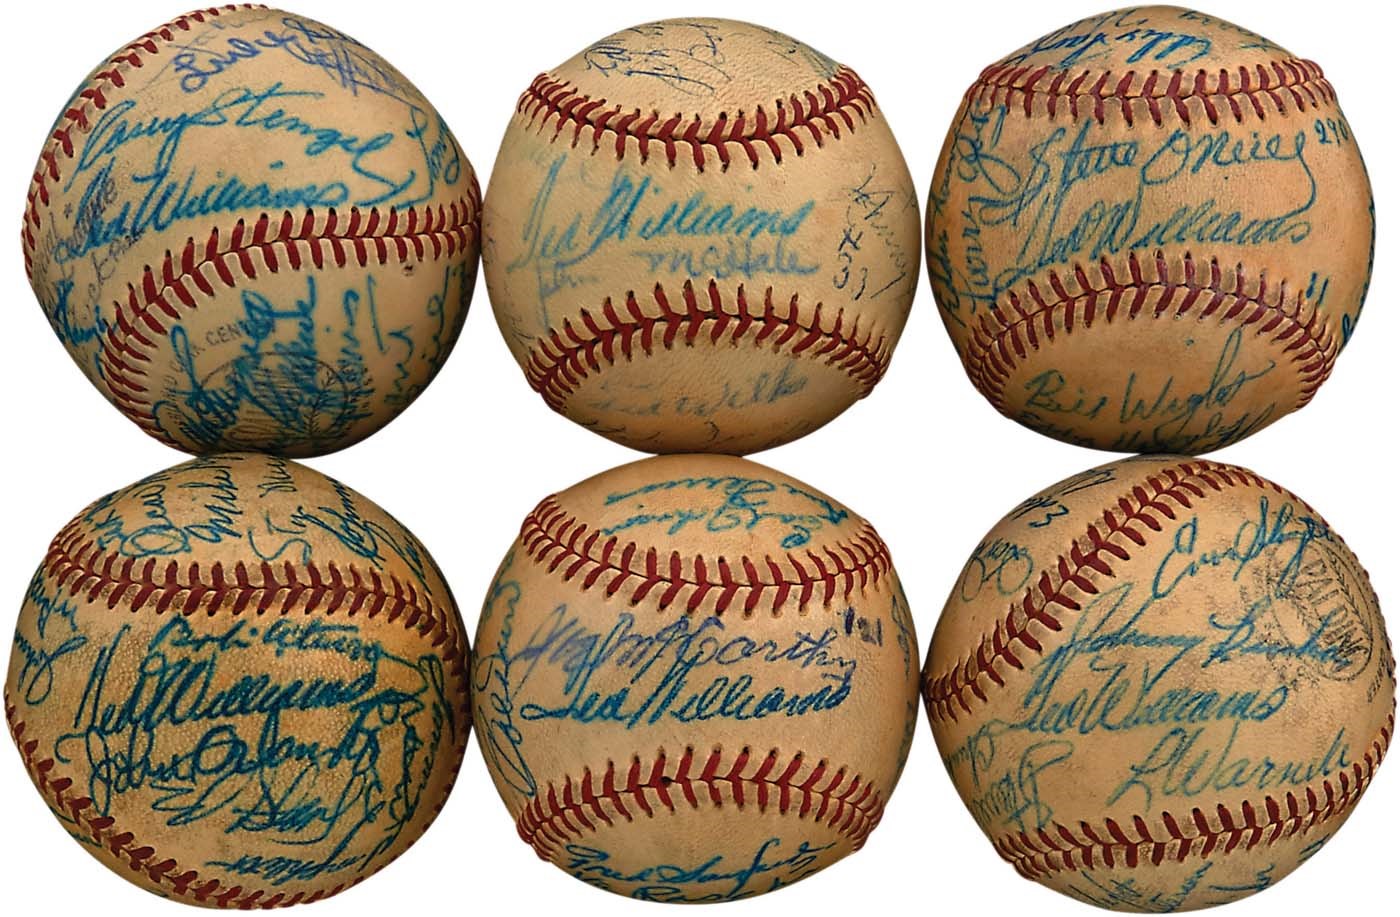 The John O'connor Signed Baseball Collection - 1940s-50s Red Sox Team & HOFers/Stars Signed Baseballs ALL w/Ted Williams (6)